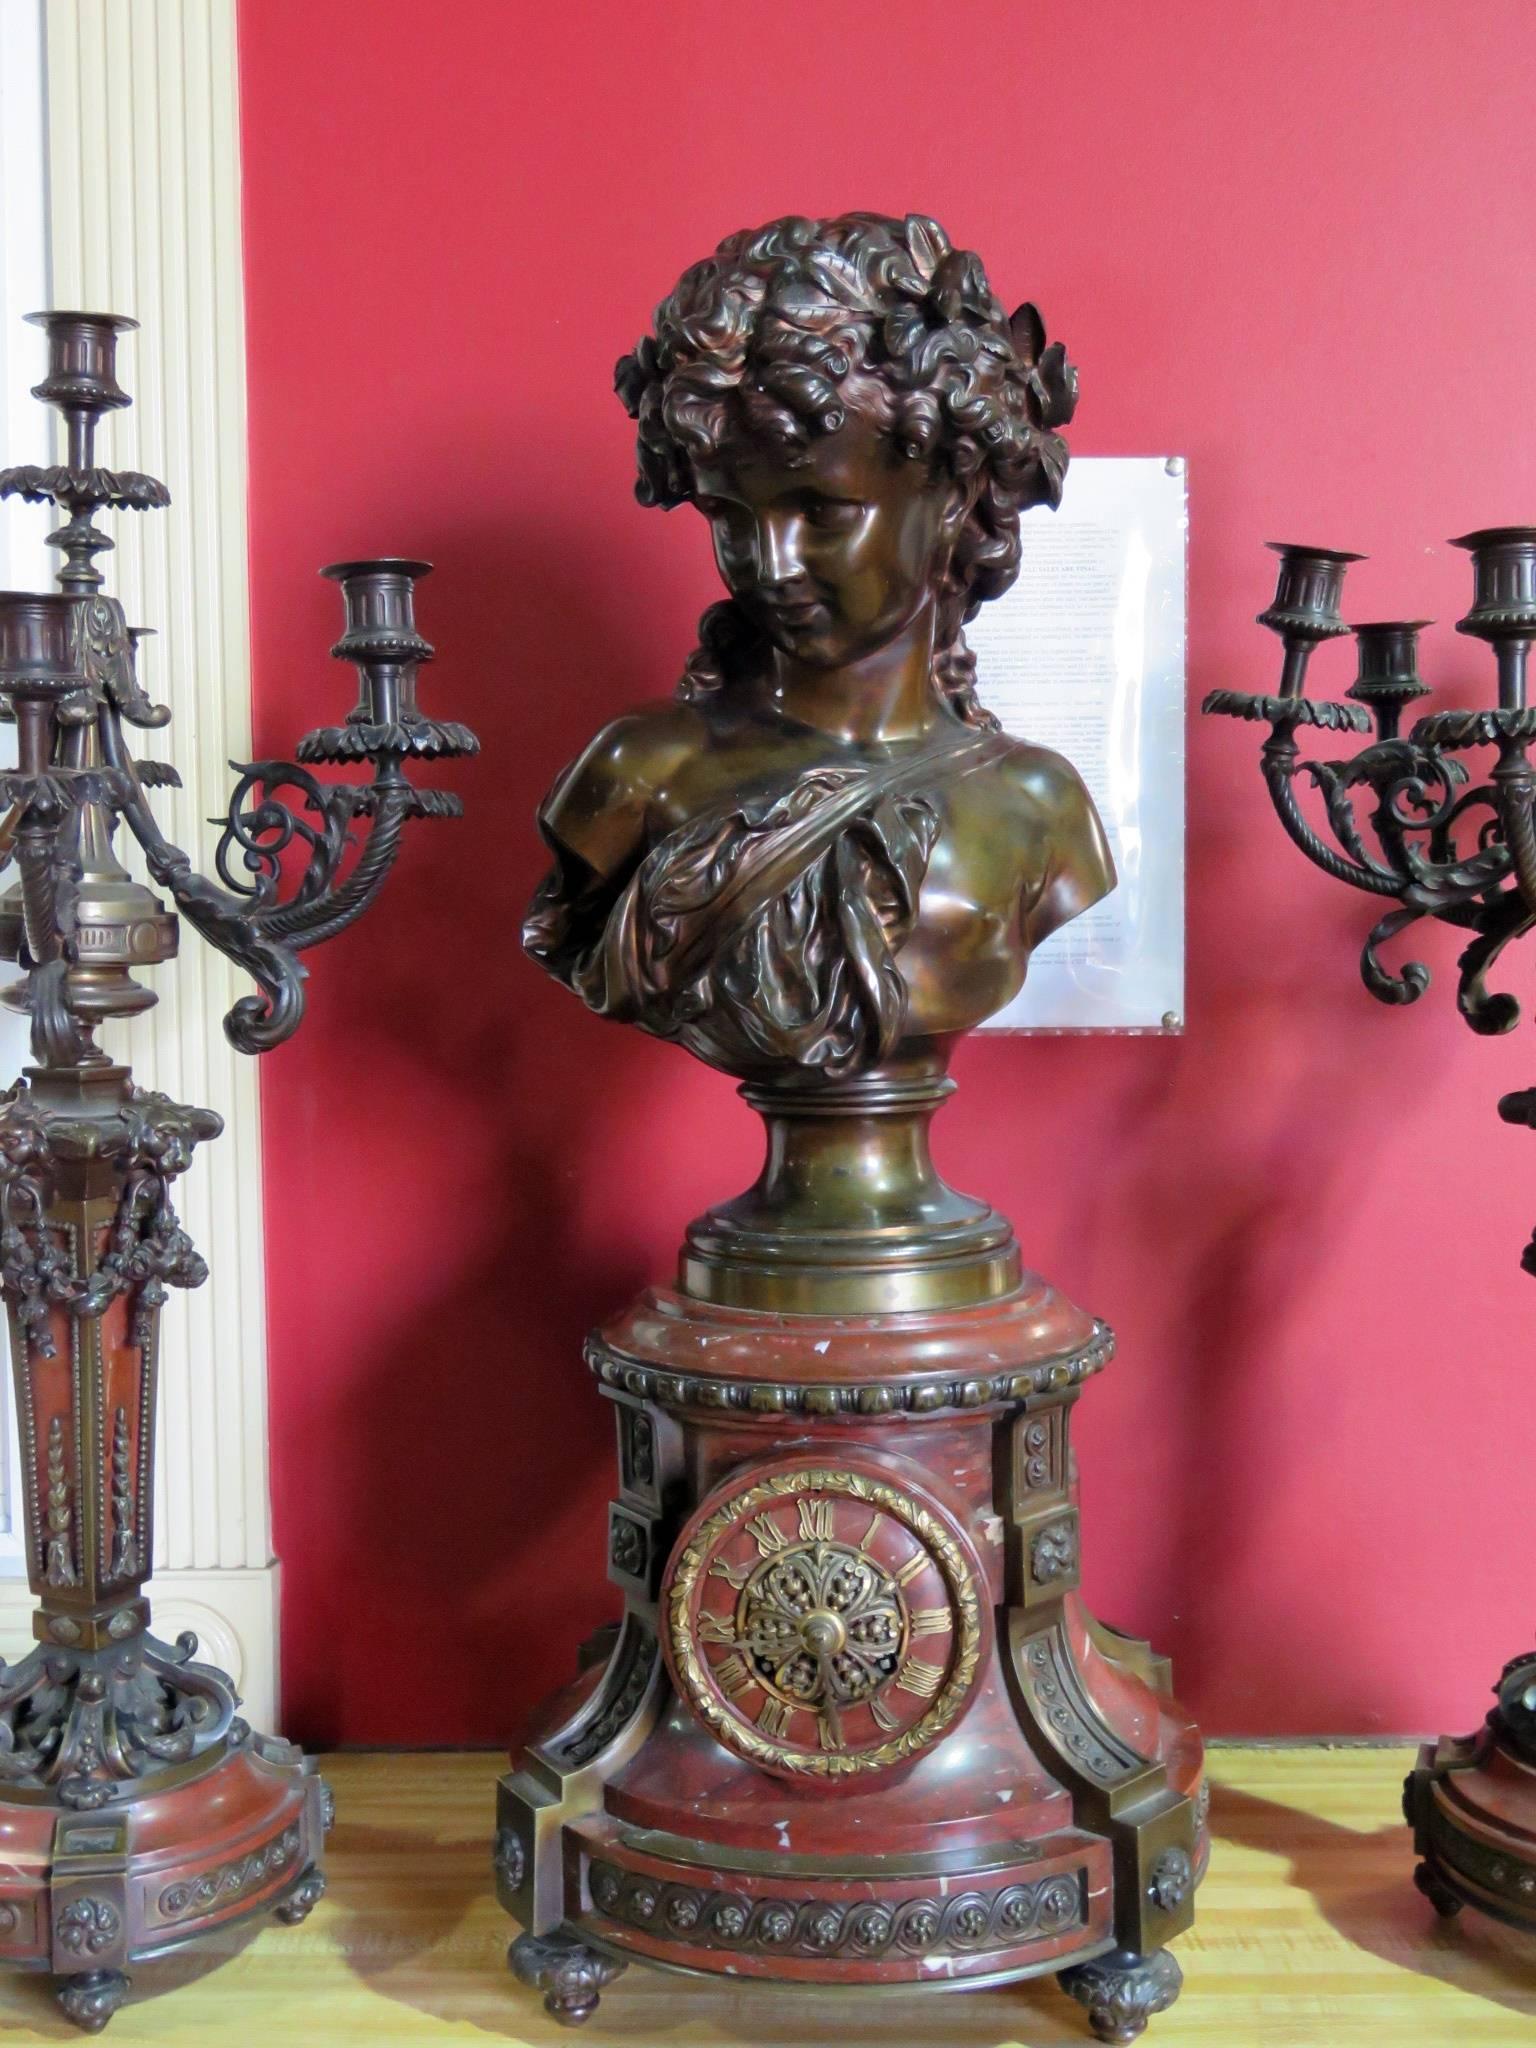 Palatial three-piece clock set with bronze and marble clock set by Canivet. Clock measures: 22